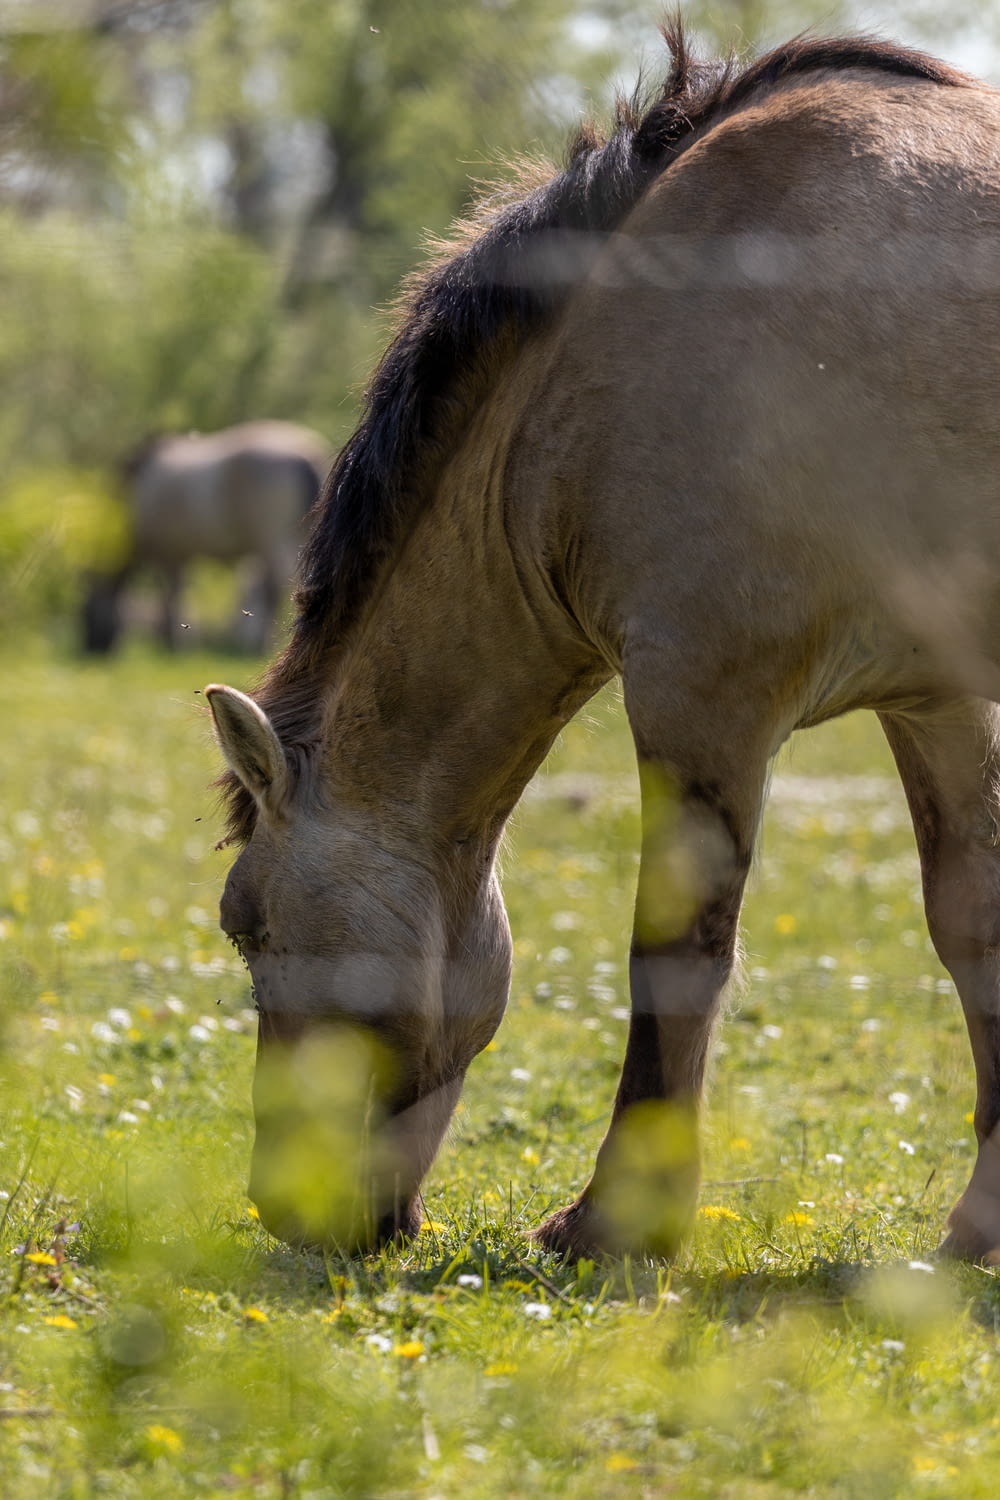 brown horse eating grass during daytime